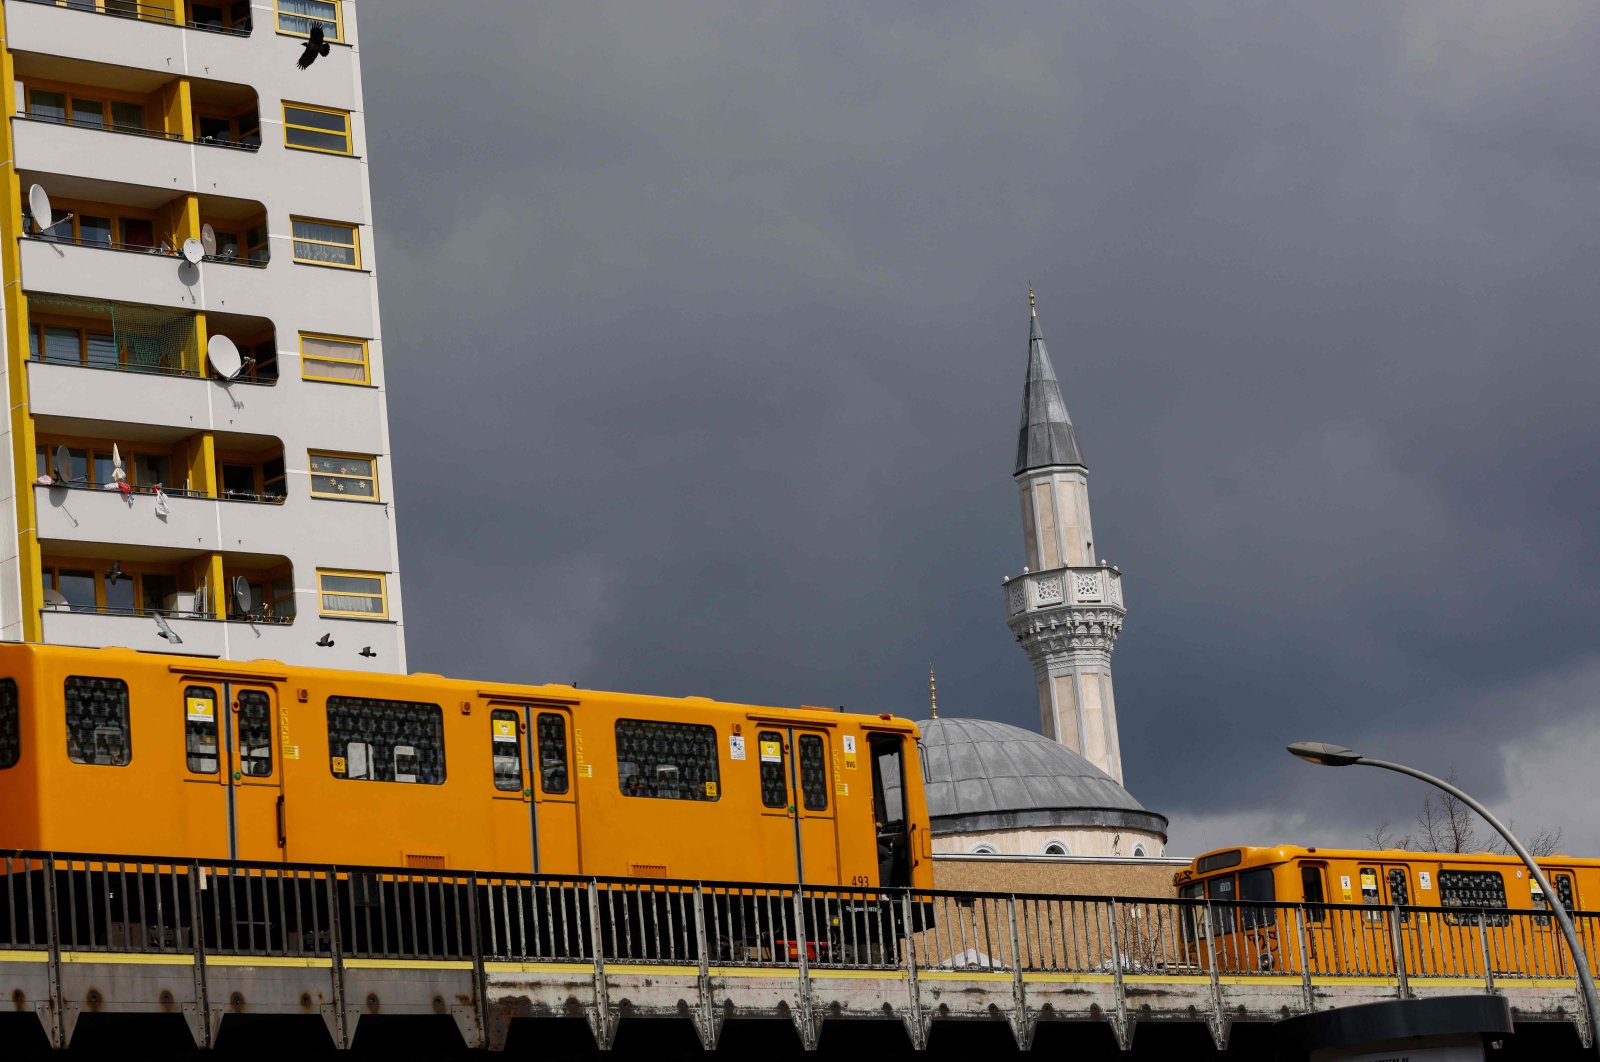 Two U-bahn subway trains drive past the Mevlana Mosque in Berlin's Kreuzberg district on April 14, 2021, a day after the start the Muslim holy fasting month of Ramadan. (Photo by David GANNON / AFP)